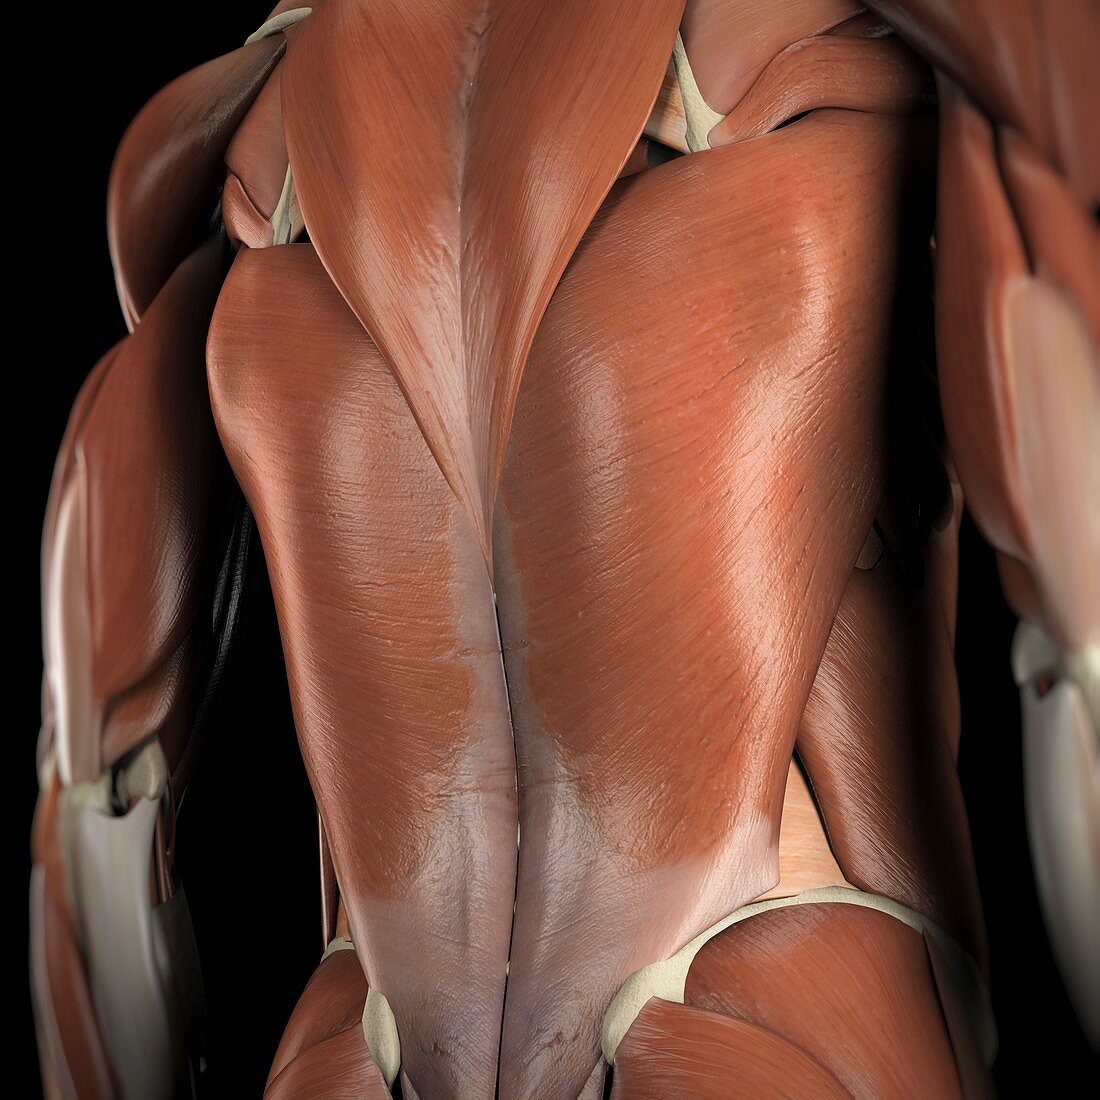 Muscles of the Back, artwork